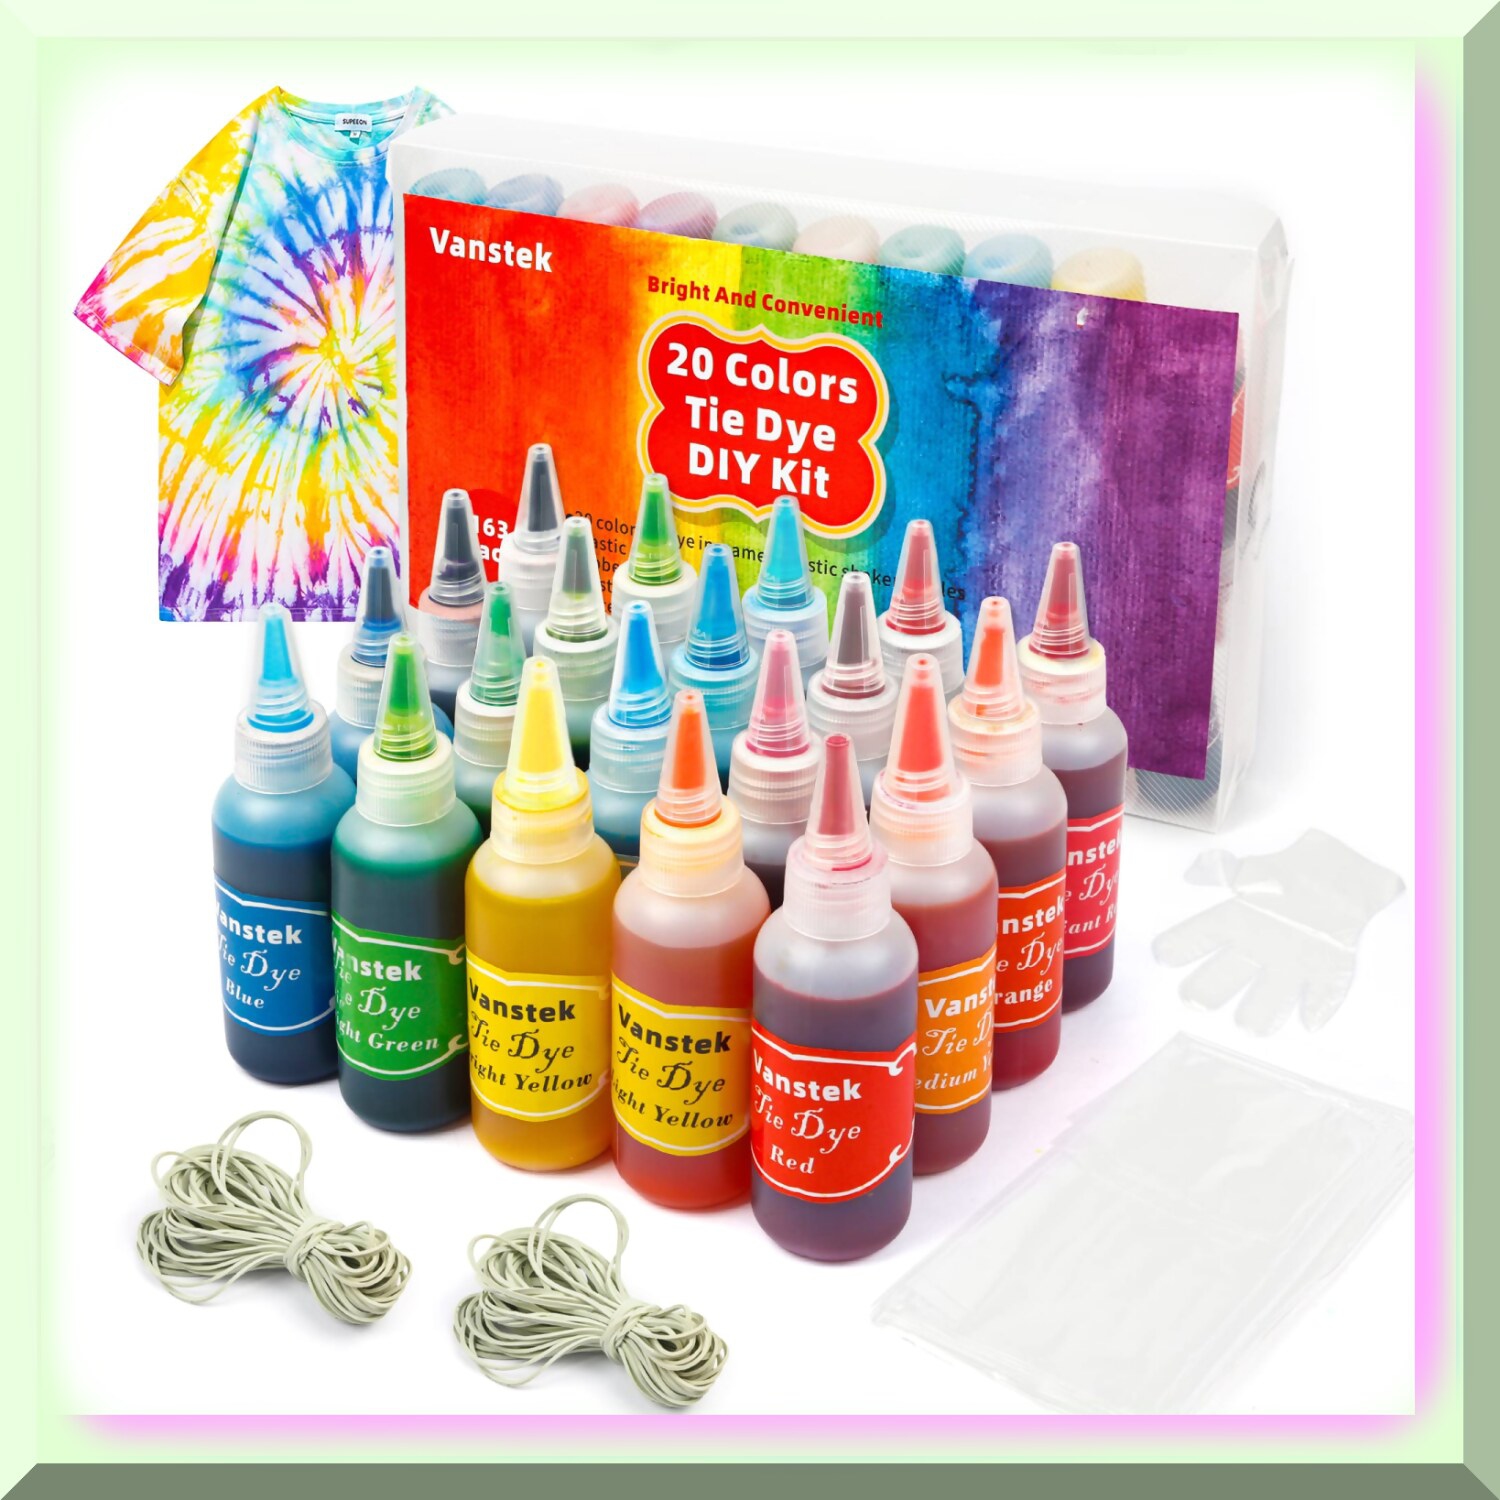 Rainbow Burst Tie Dye Kit - Vibrant Fabric Dye Set for Women, Kids, Men - DIY Shirt Making with 20 Colors, Rubber Bands - Perfect for Fun-Filled Family & Friends Tie Dye Party!